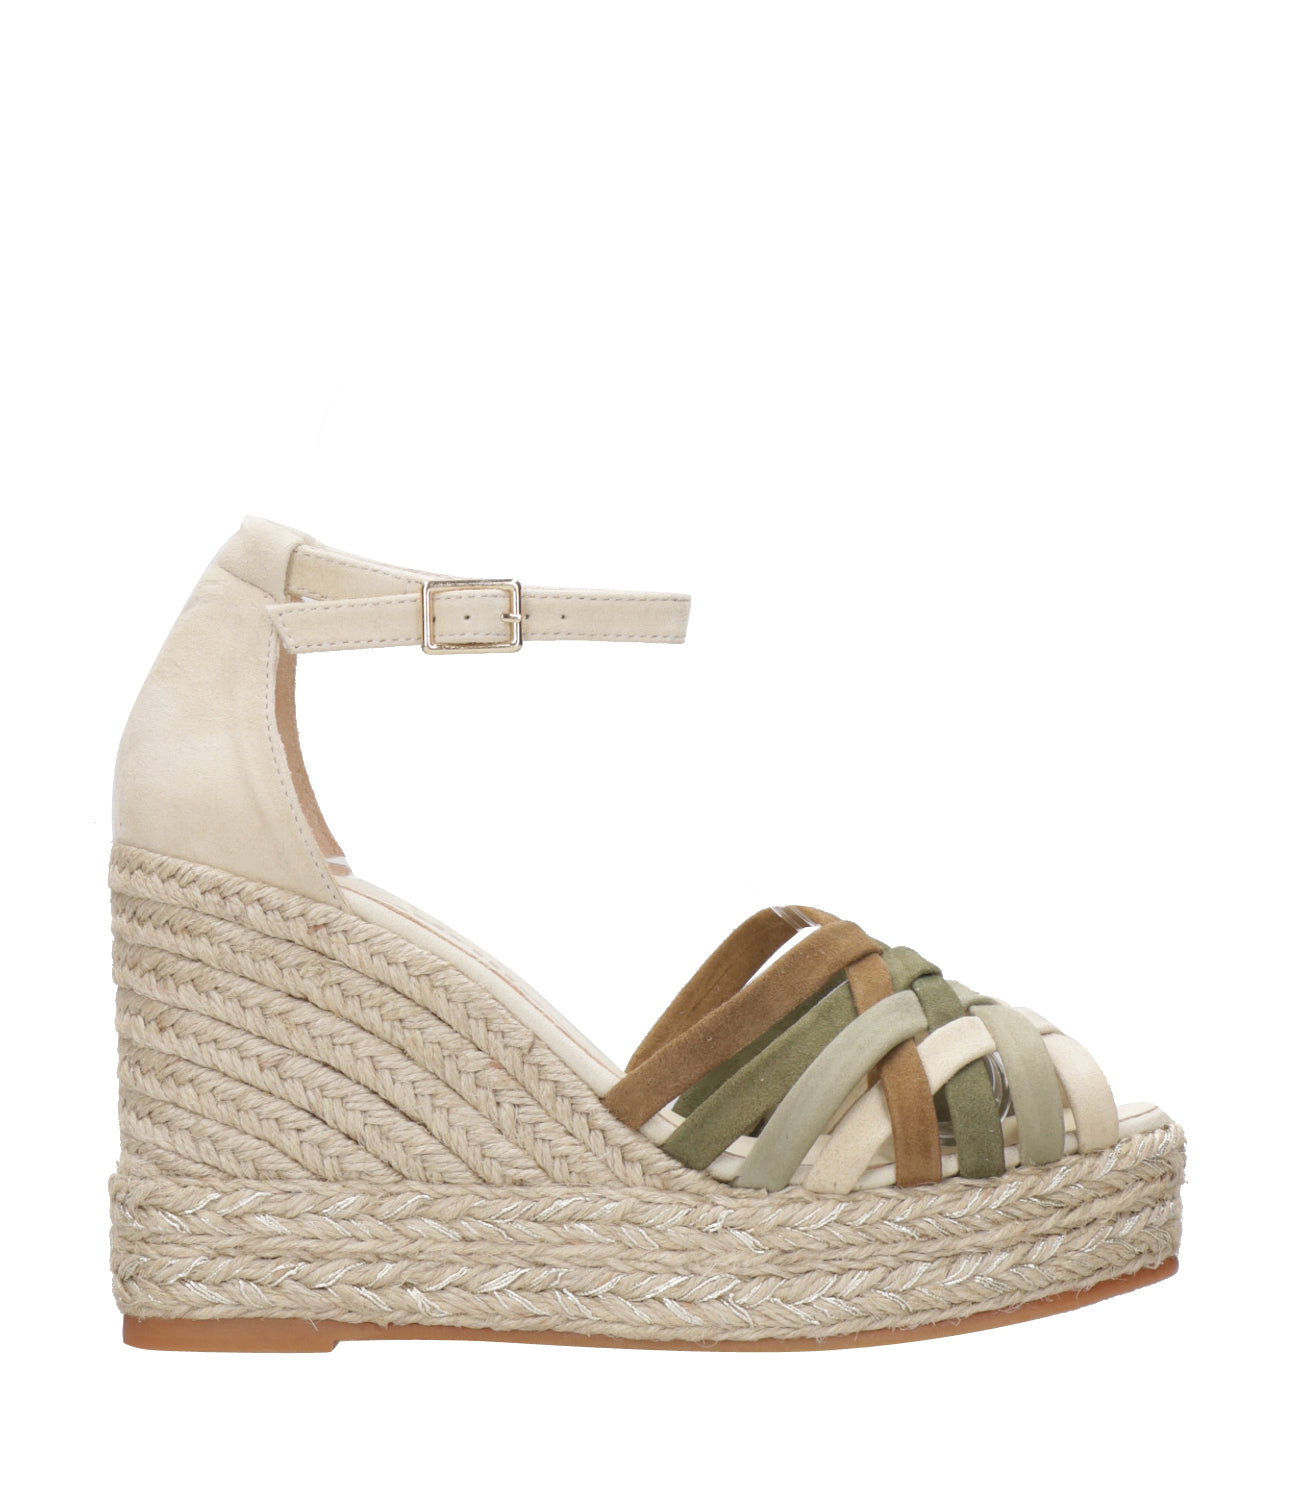 Espadrilles | Sandal Ale Ante Green and Beige